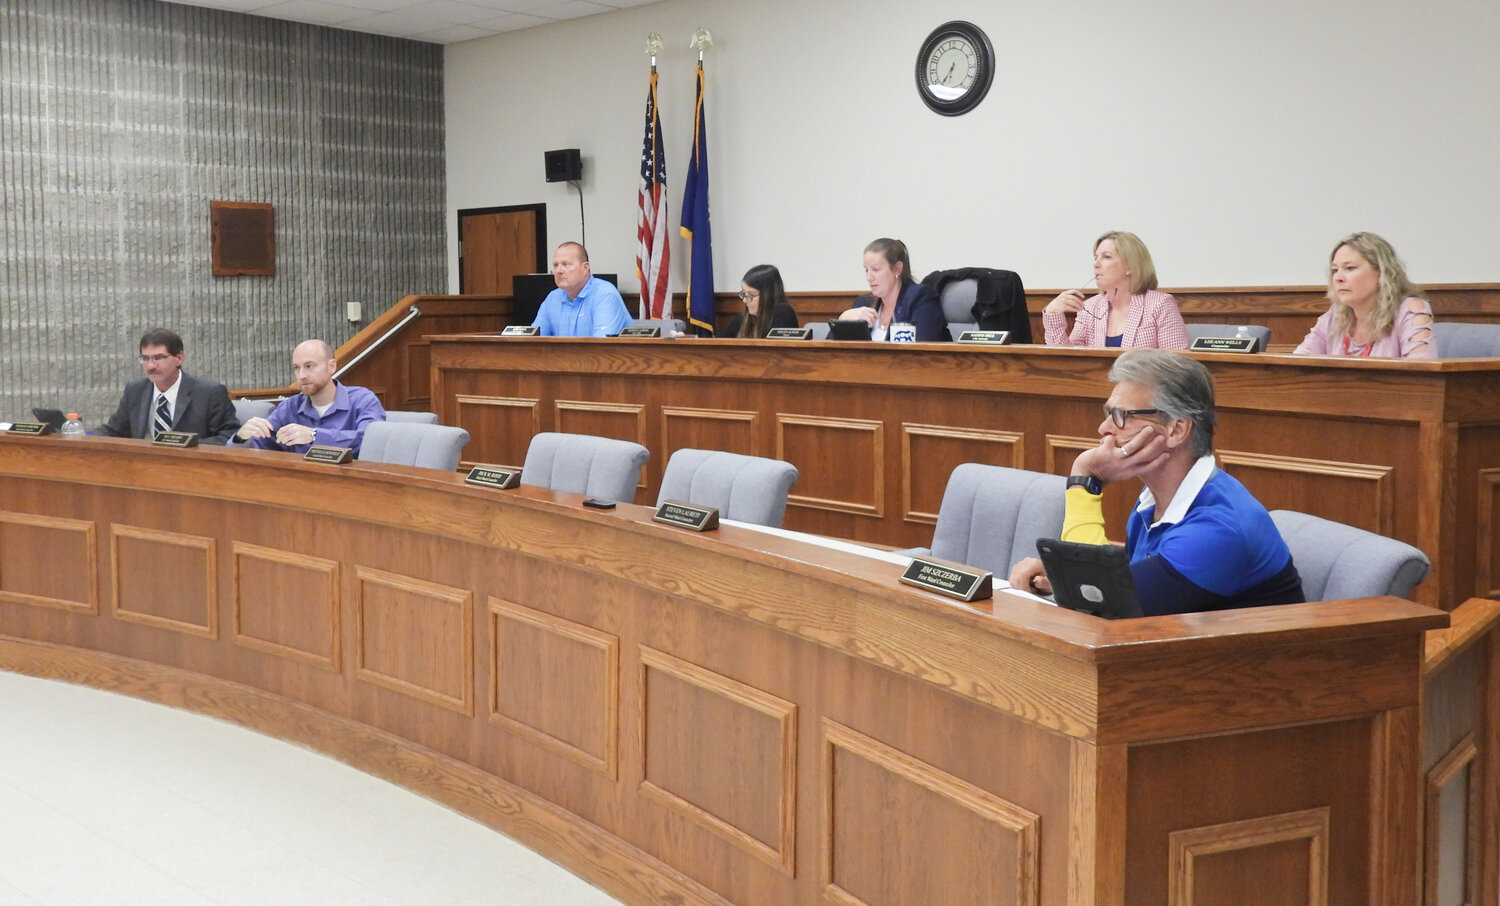 The Oneida Common Council meets for its regular meeting on Tuesday, May 16. Deputy Mayor Michelle Kinville presided the meeting. Ward 2 Councilor Steve Laureti and Ward 3 Councilor Rick Rossi were not in attendance.